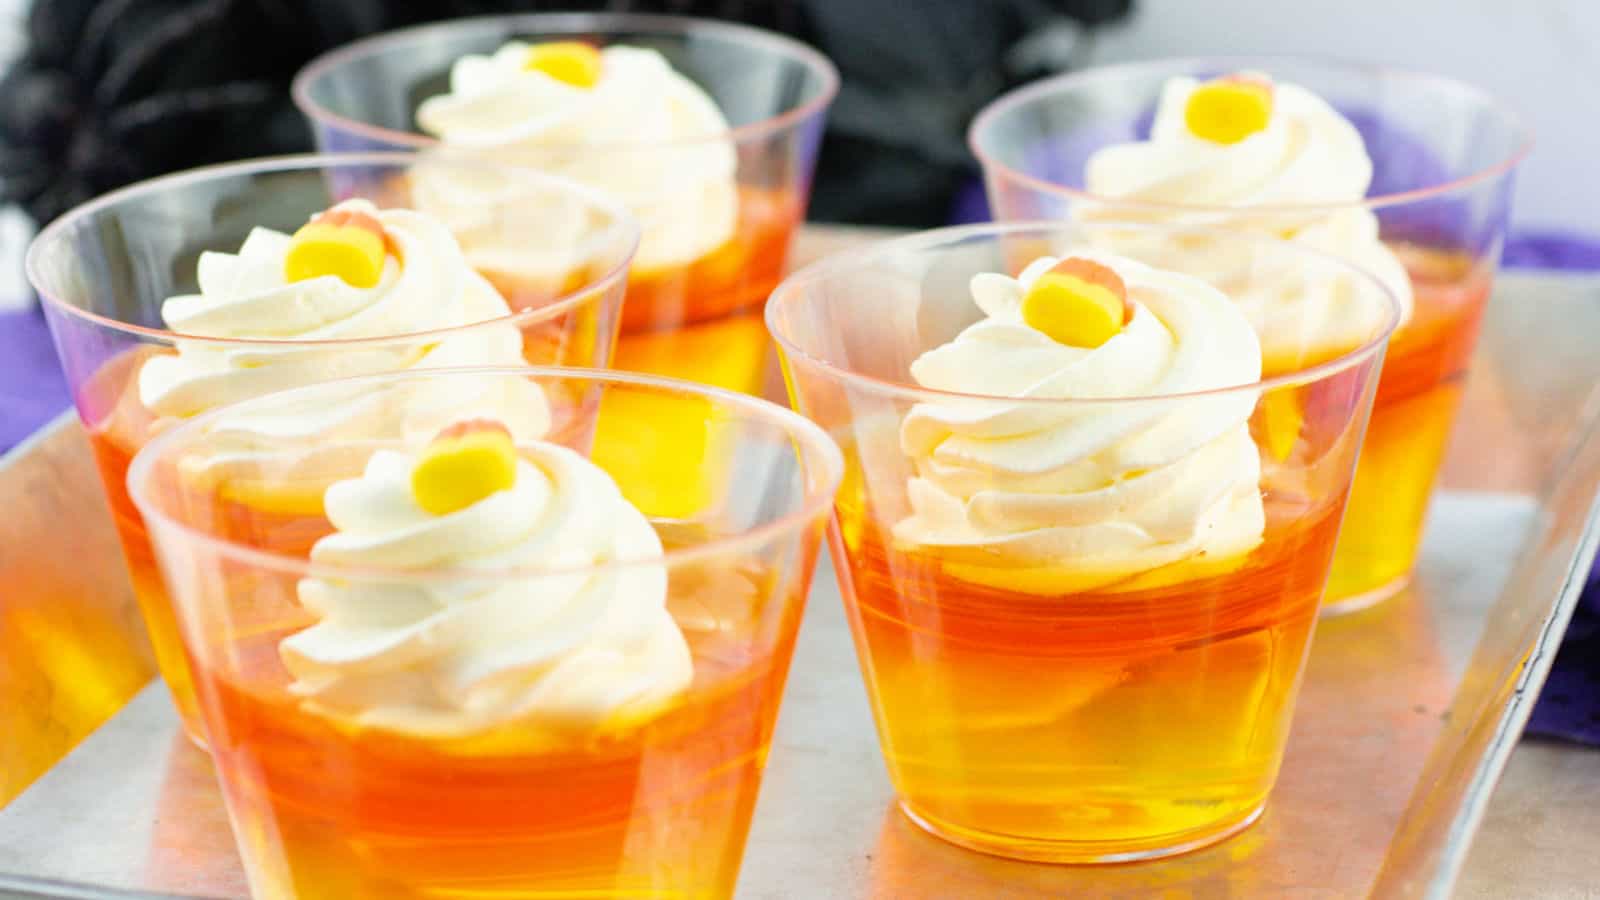 Orange and yellow Jello dessert cups on a tray.